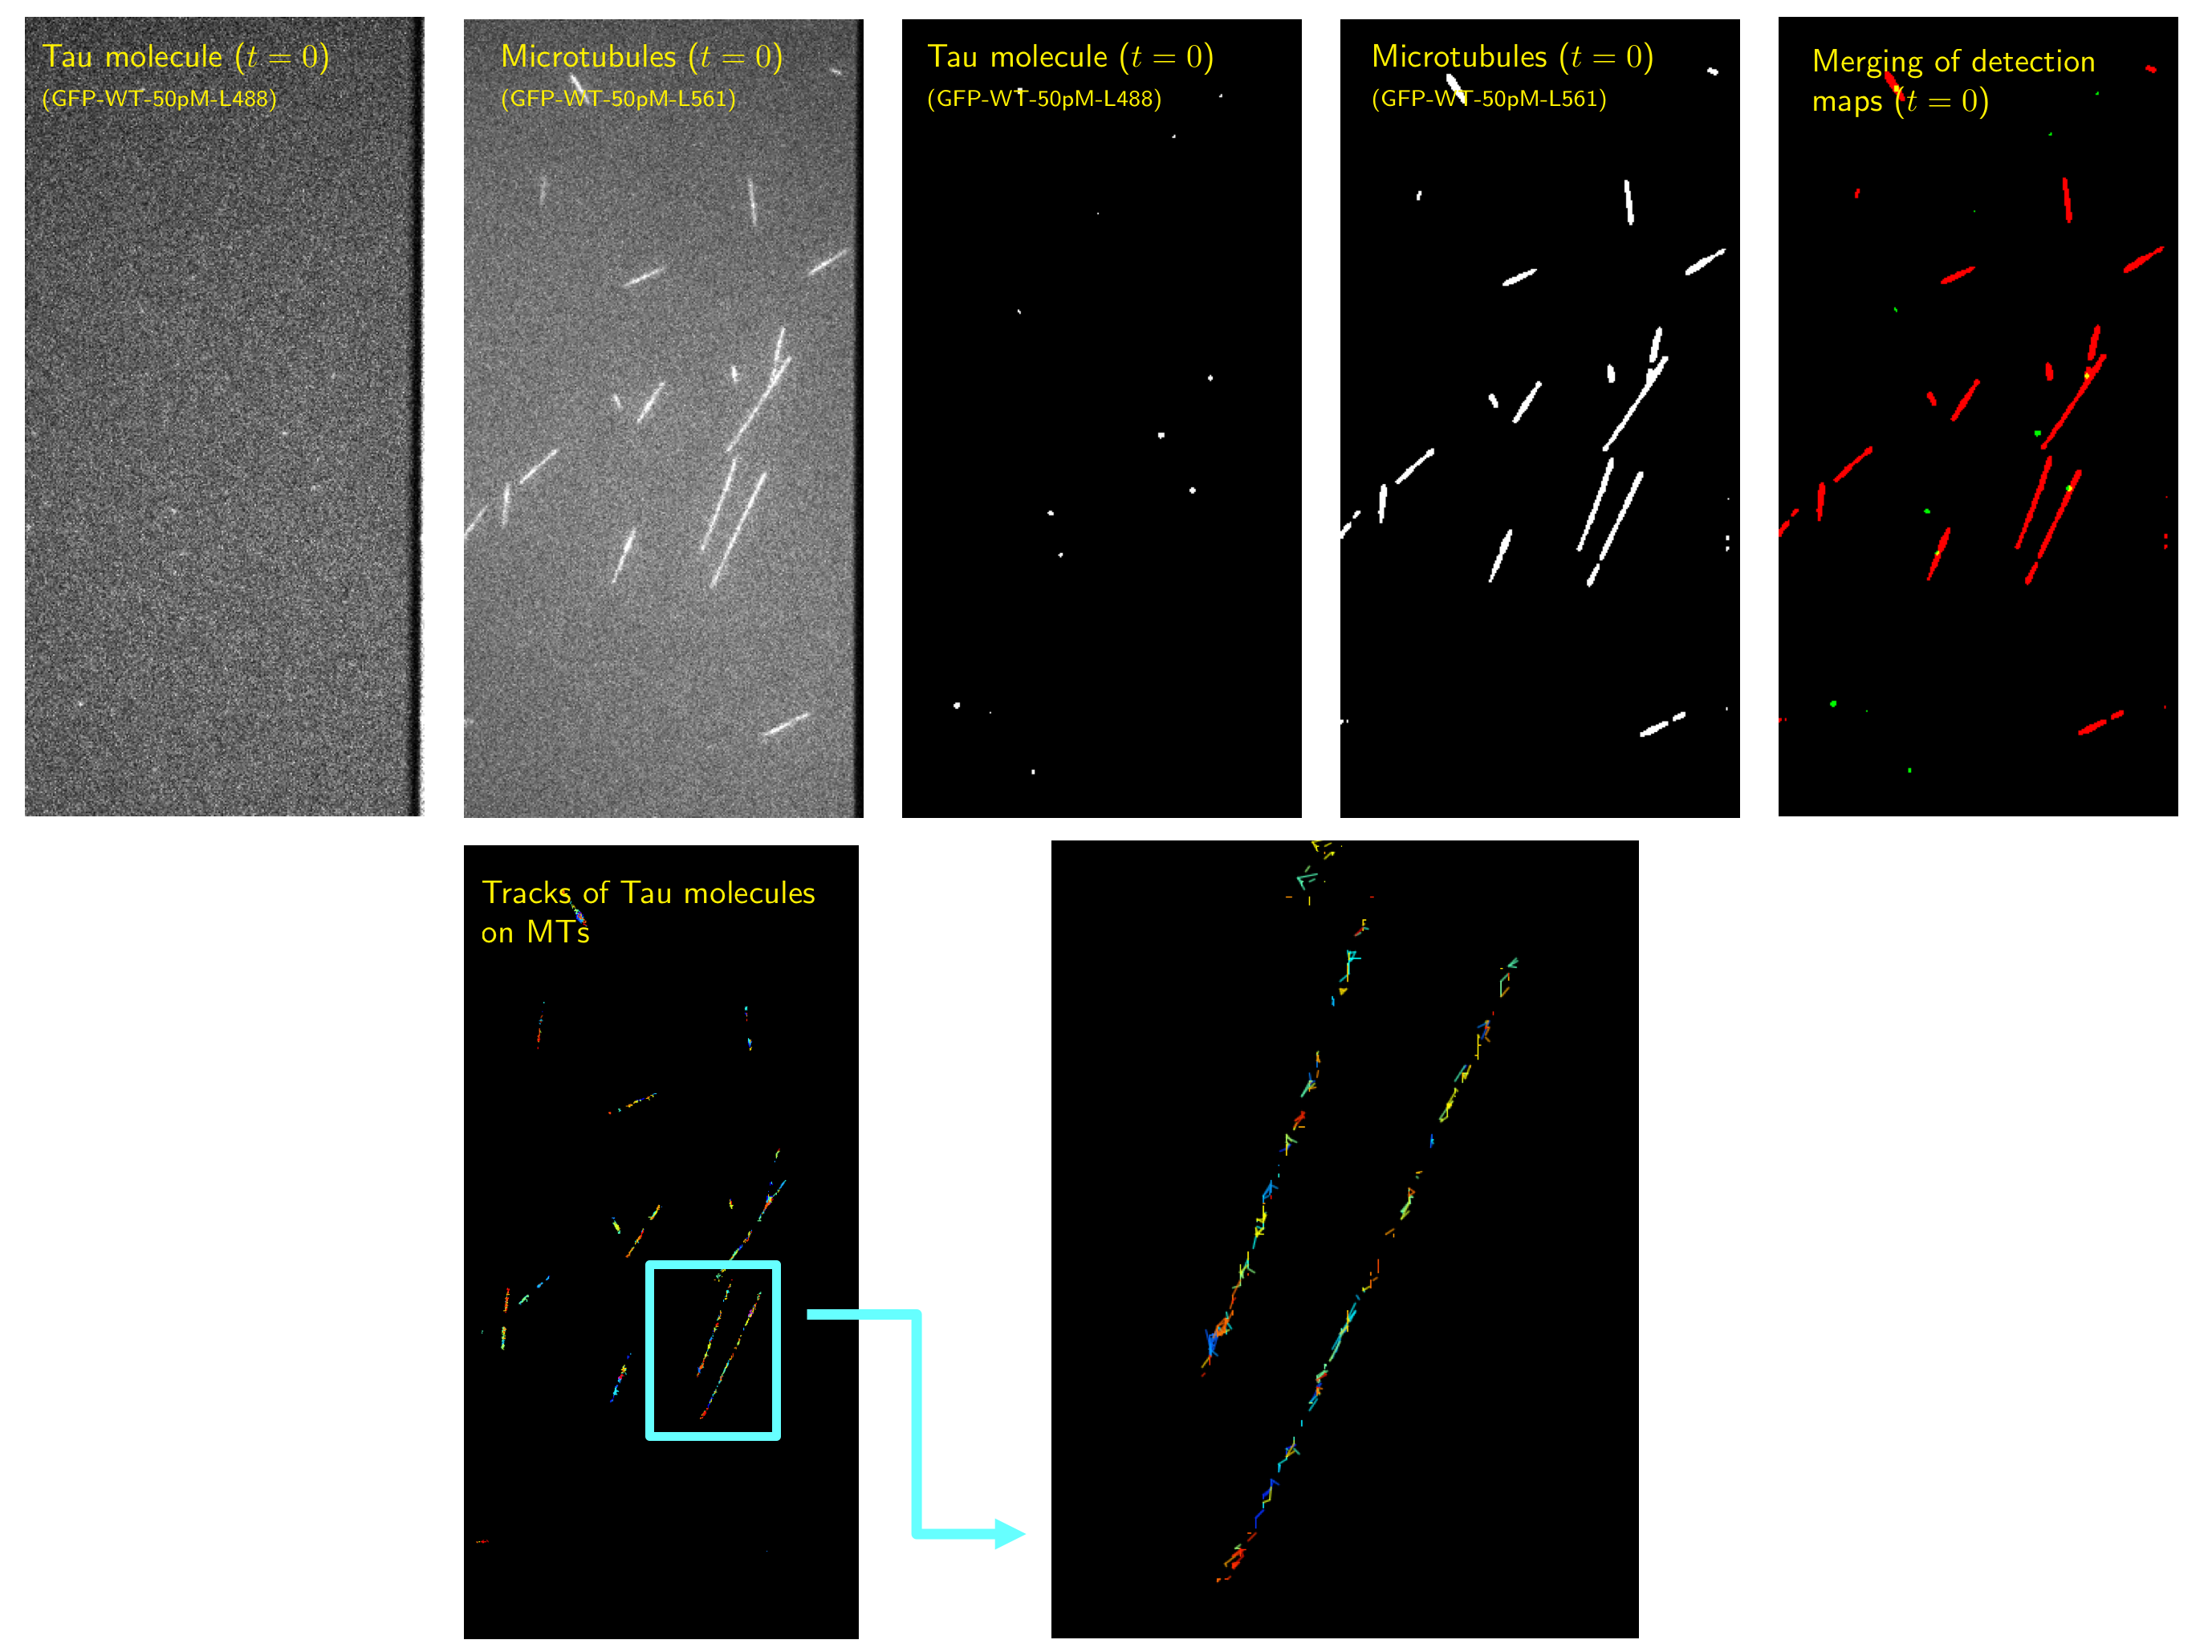 Interaction of single Tau molecules with microtubules. Top: image pair at time t=0t=0 (left), detection of tau proteins and microtubules (middle), and merging of detection masks (right). Bottom: Tracking of Tau proteins on microtubules.